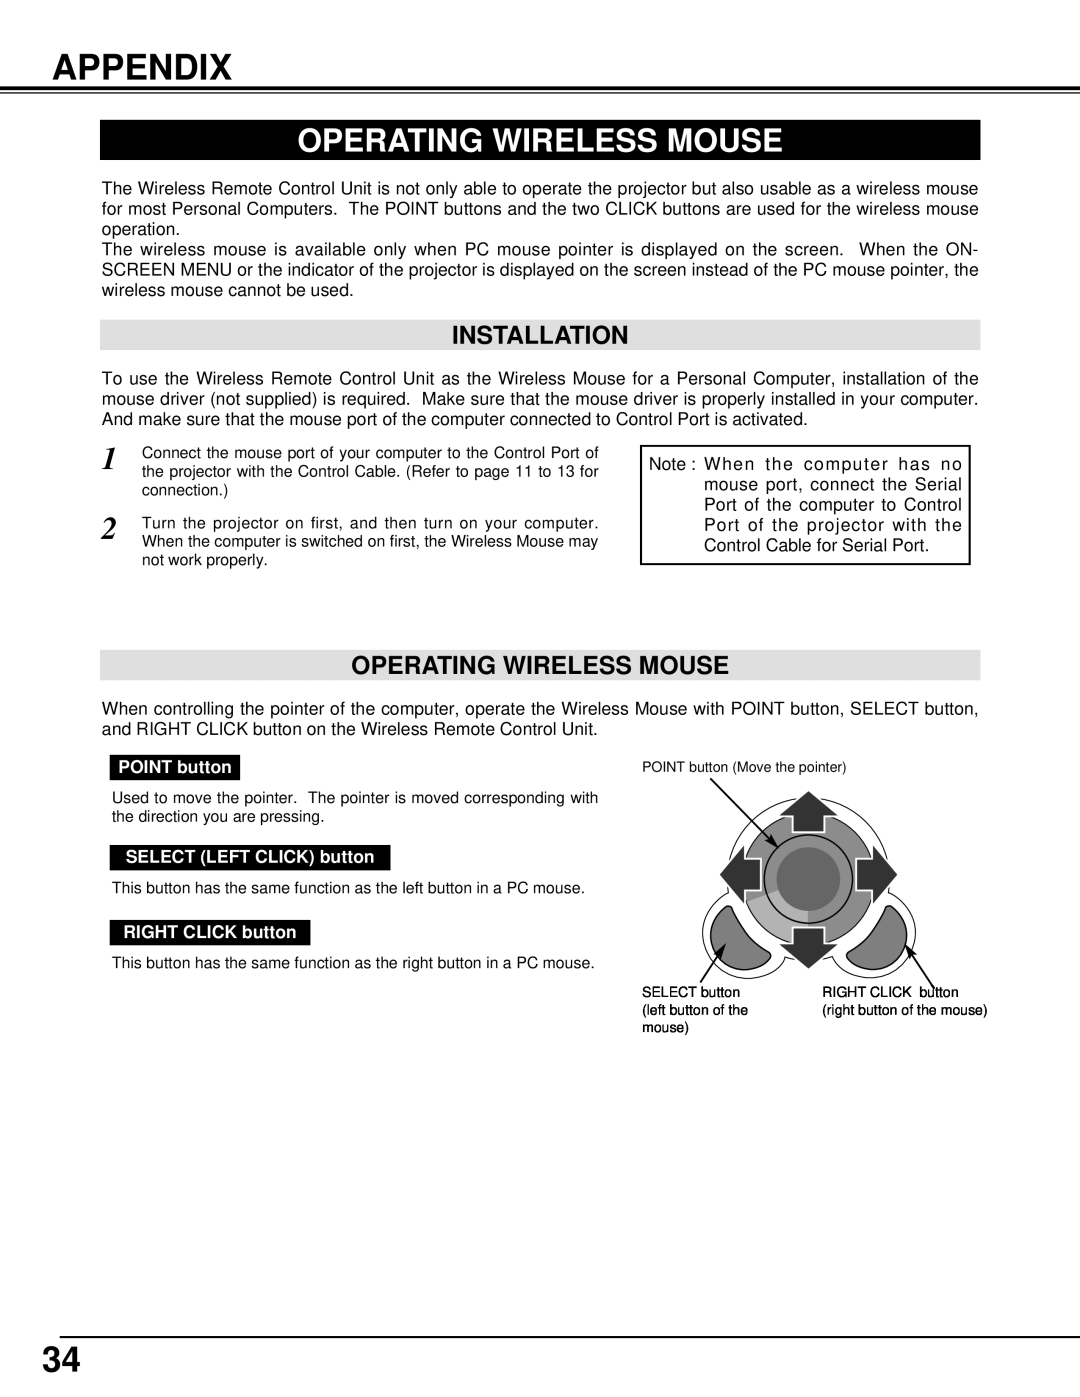 Canon 5100 owner manual Appendix, Operating Wireless Mouse, Installation 